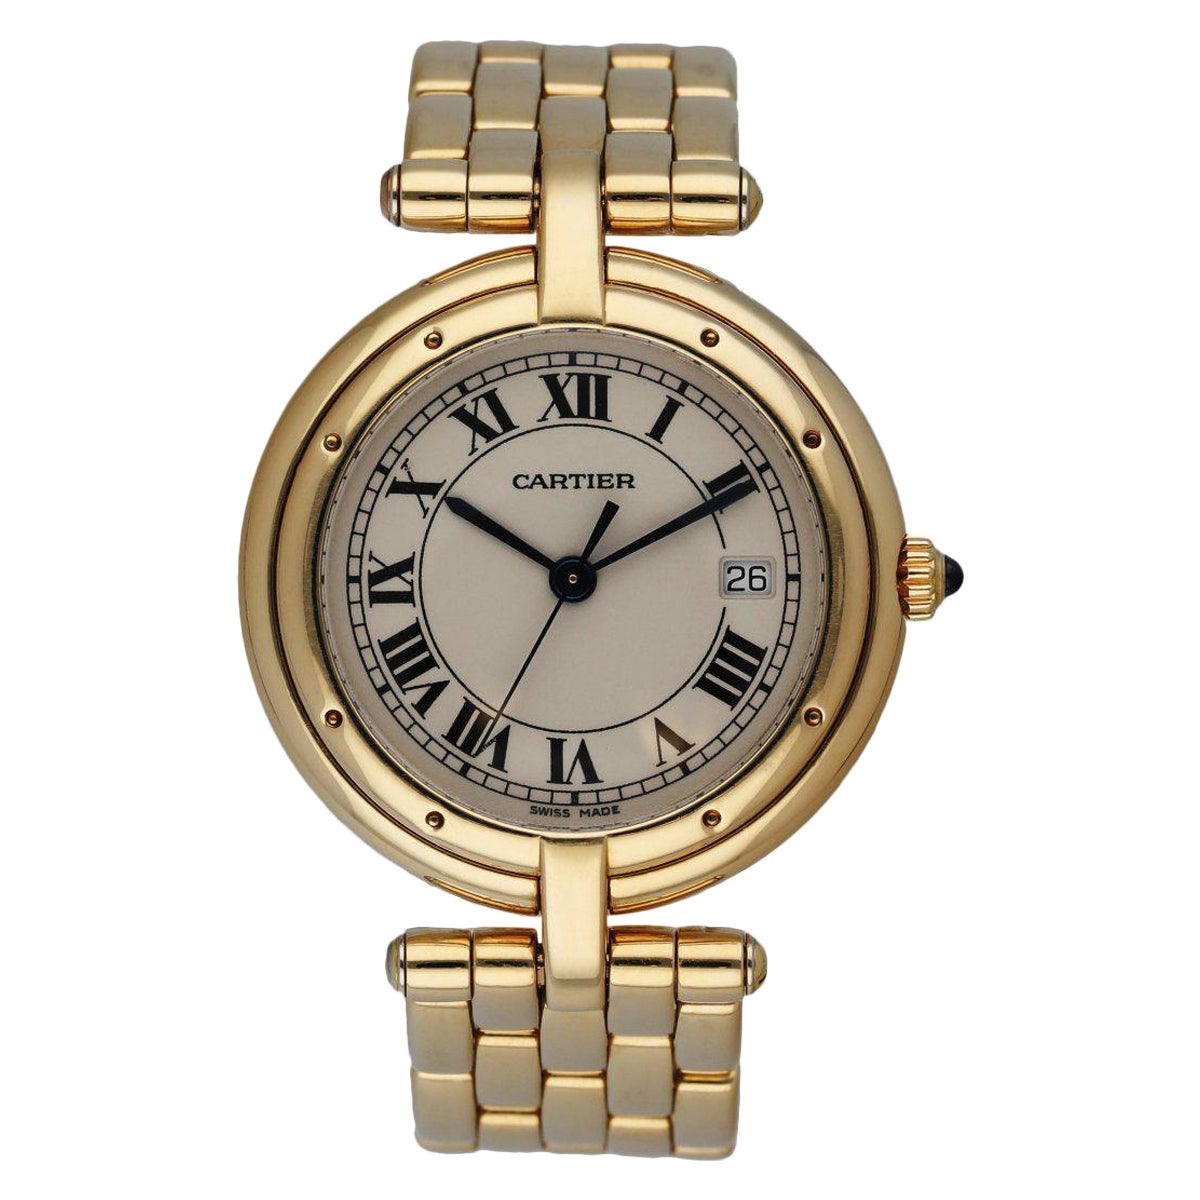 Cartier Cougar Panthere 18K Yellow Gold Ladies Watch